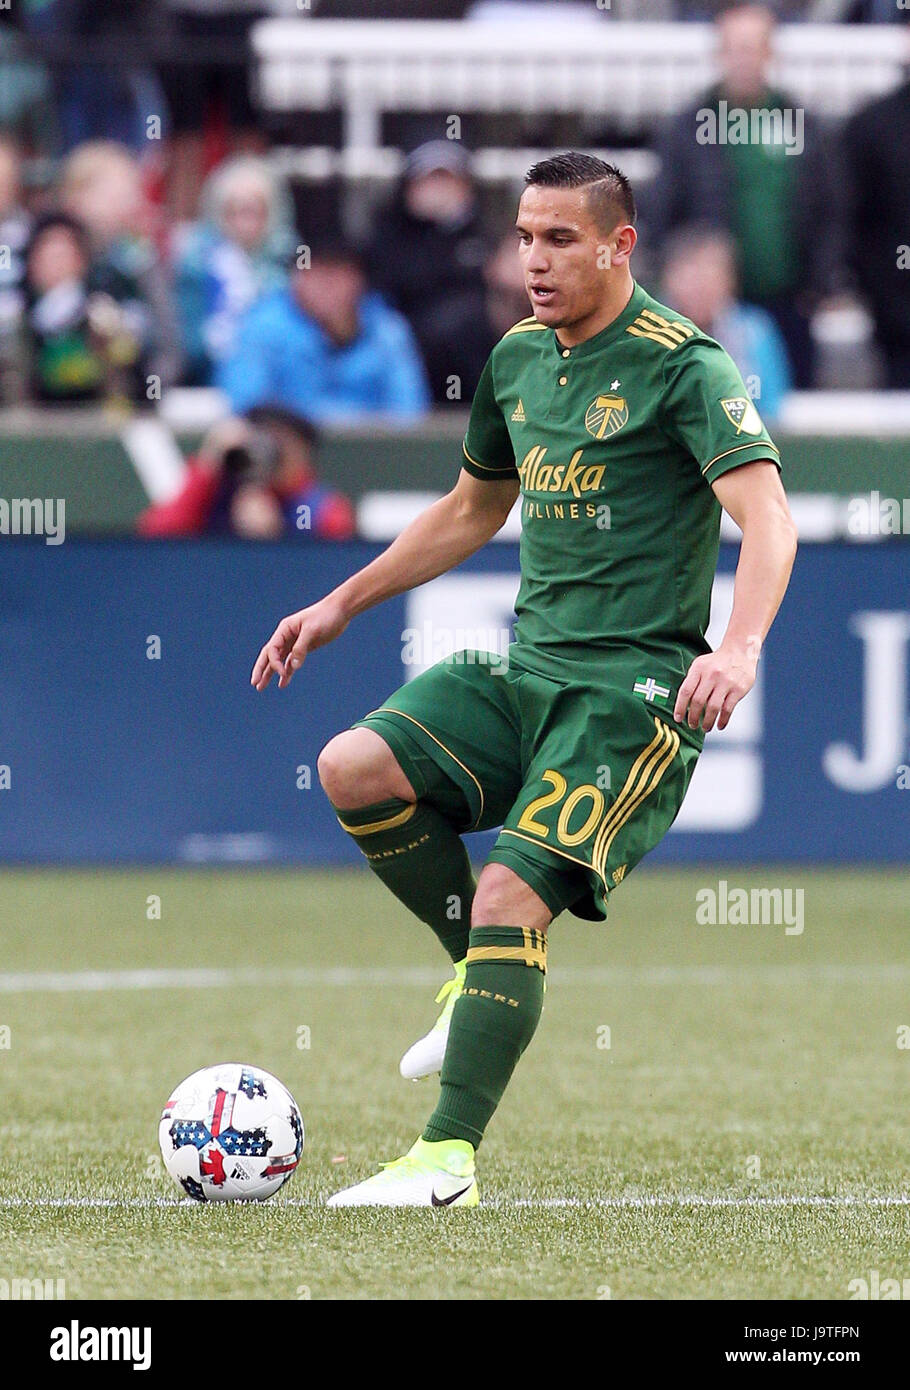 April 02, 2017. Portland Timbers midfielder David Guzman (20) looks for an open teammate during the first half of the MLS match between the visiting New England Revolution and the Portland Timbers at Providence Park, Portland, OR. Larry C. Lawson/CSM Stock Photo